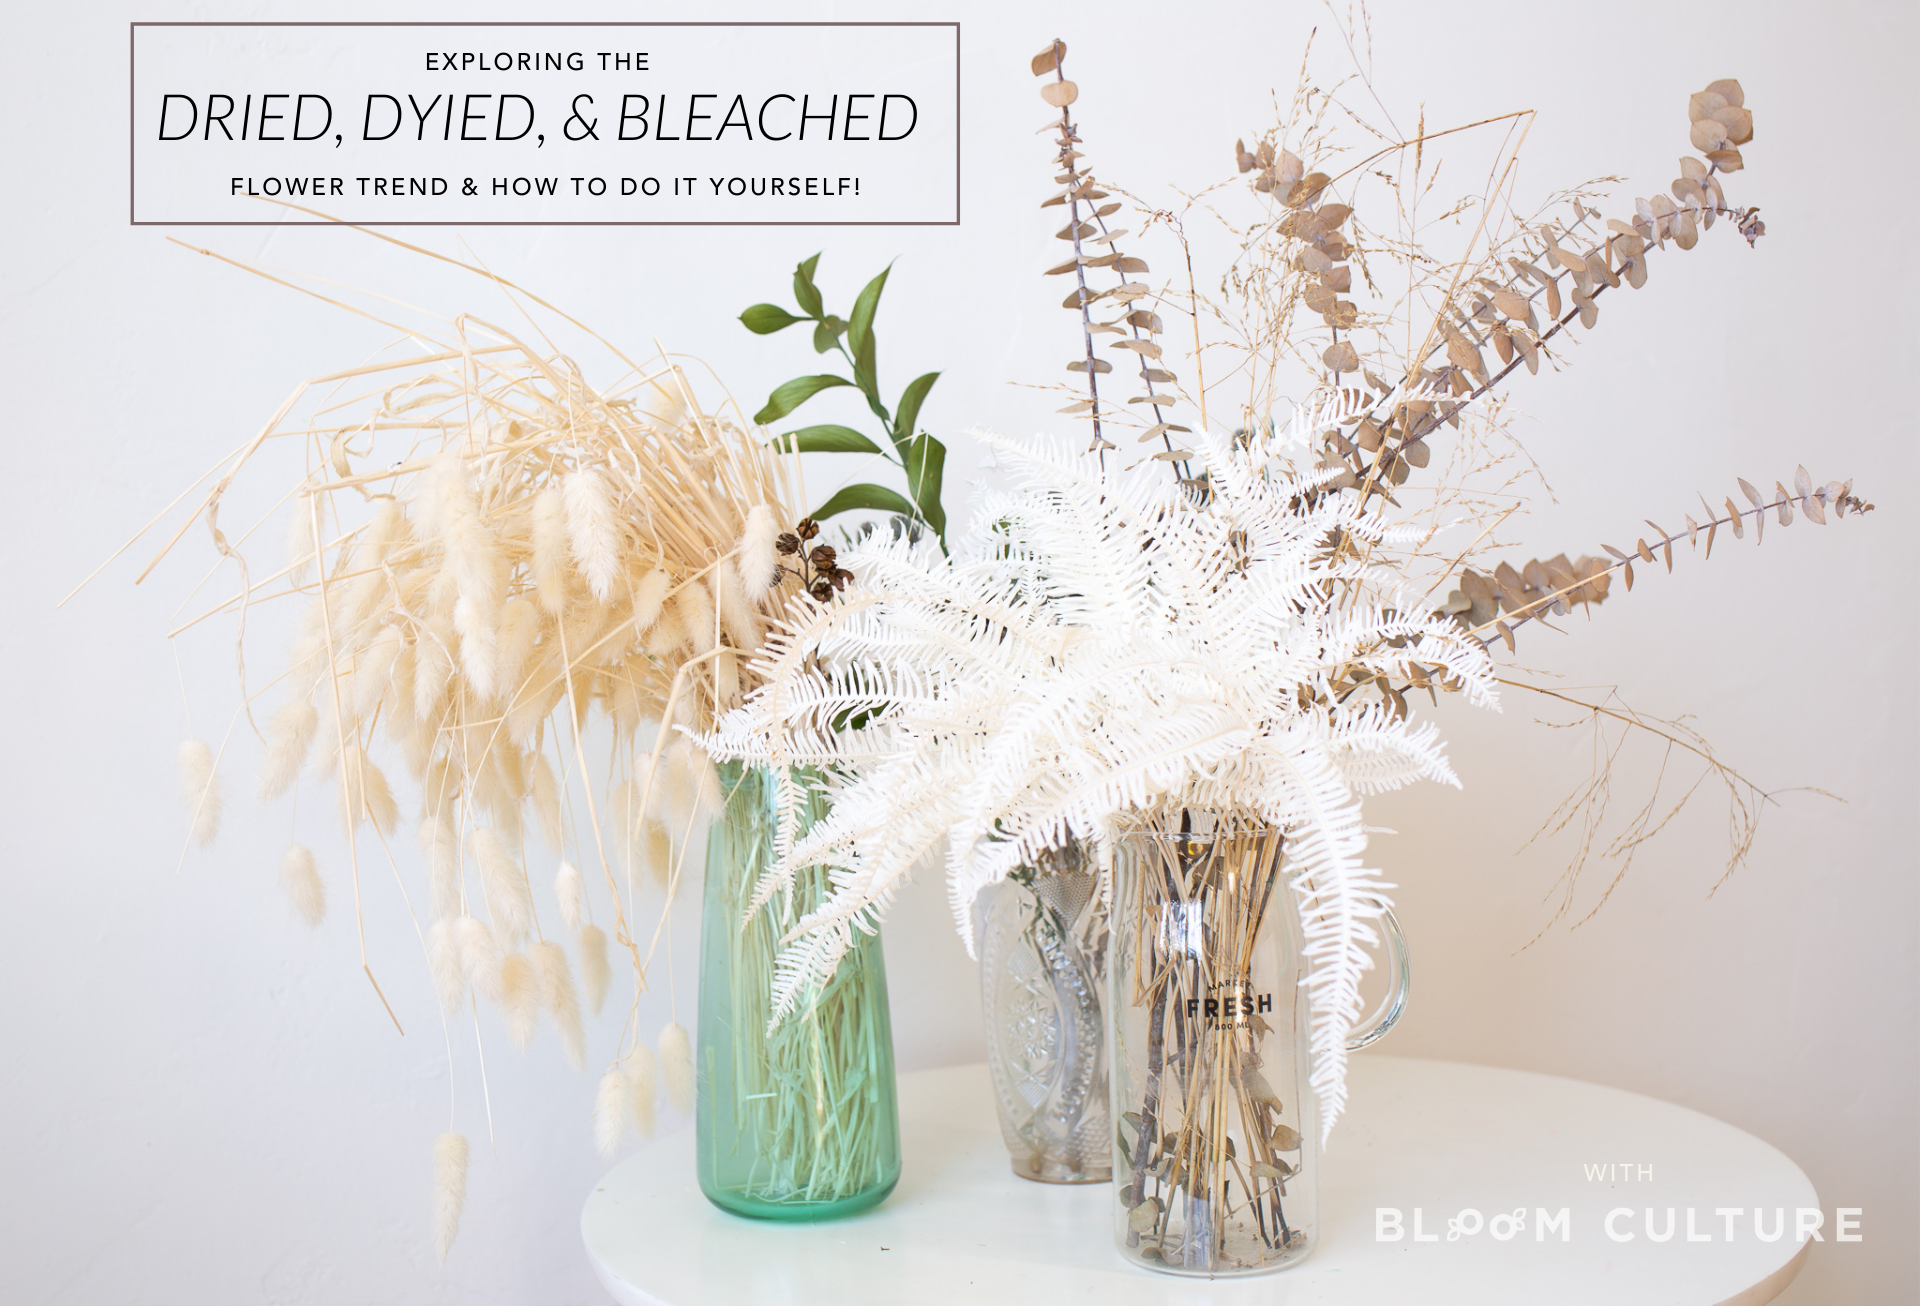 Exploring that Dried, Dyed, & bleached flower trend that's so hot right now.png